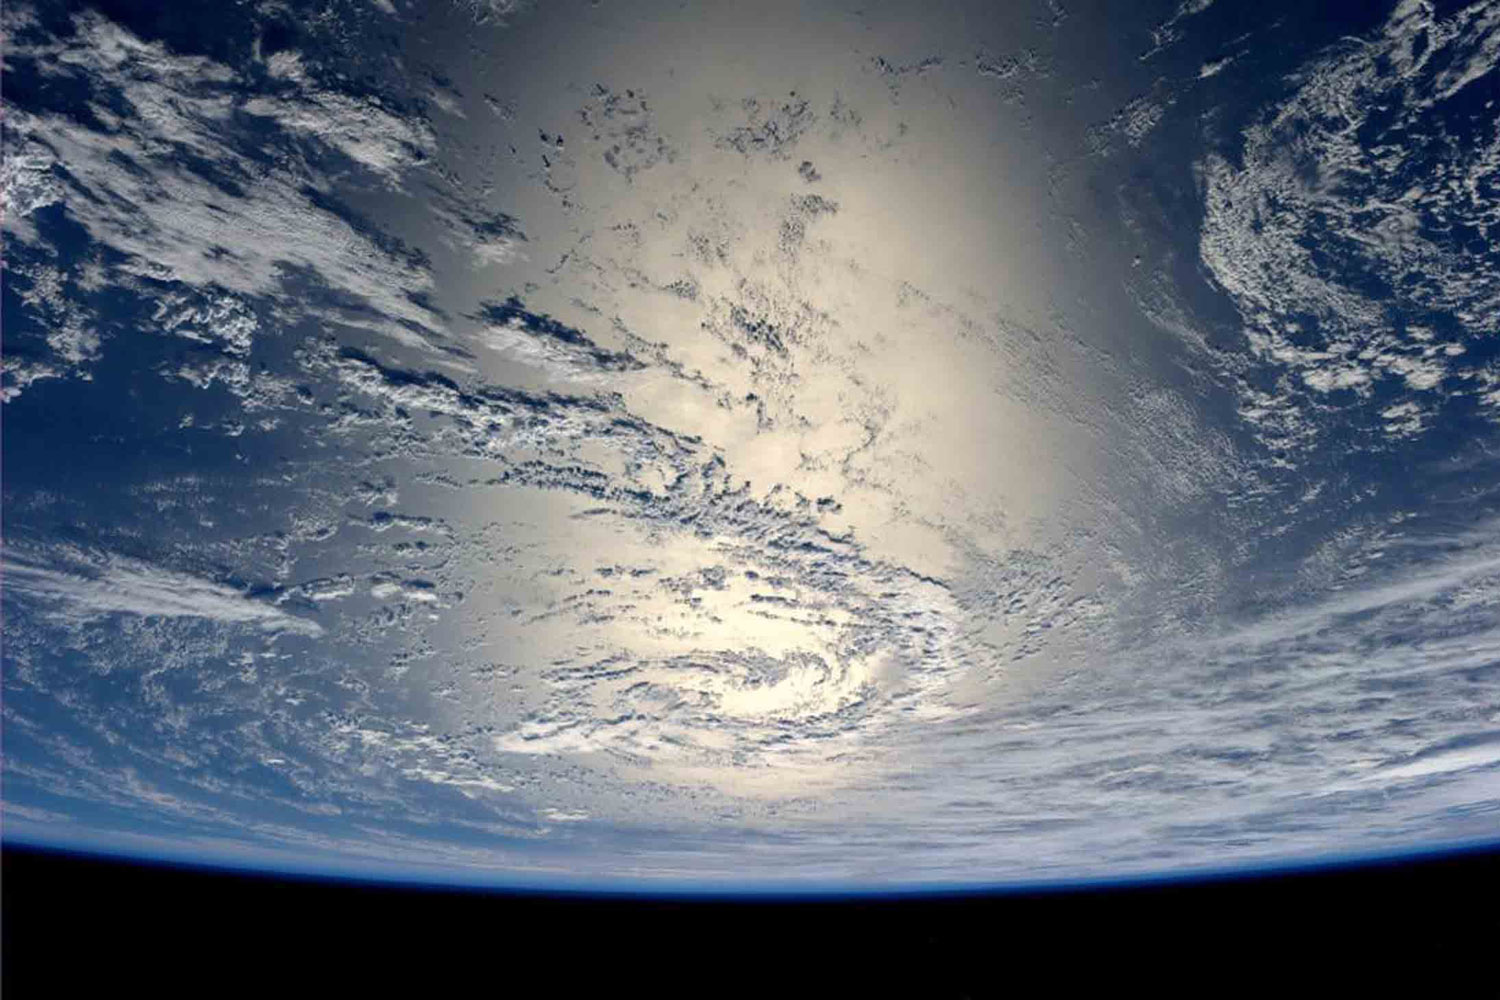 Jul. 17, 2014. The sun reflects off the water in this picture taken by German astronaut Alexander Gerst from the International Space Station and sent on his Twitter feed.